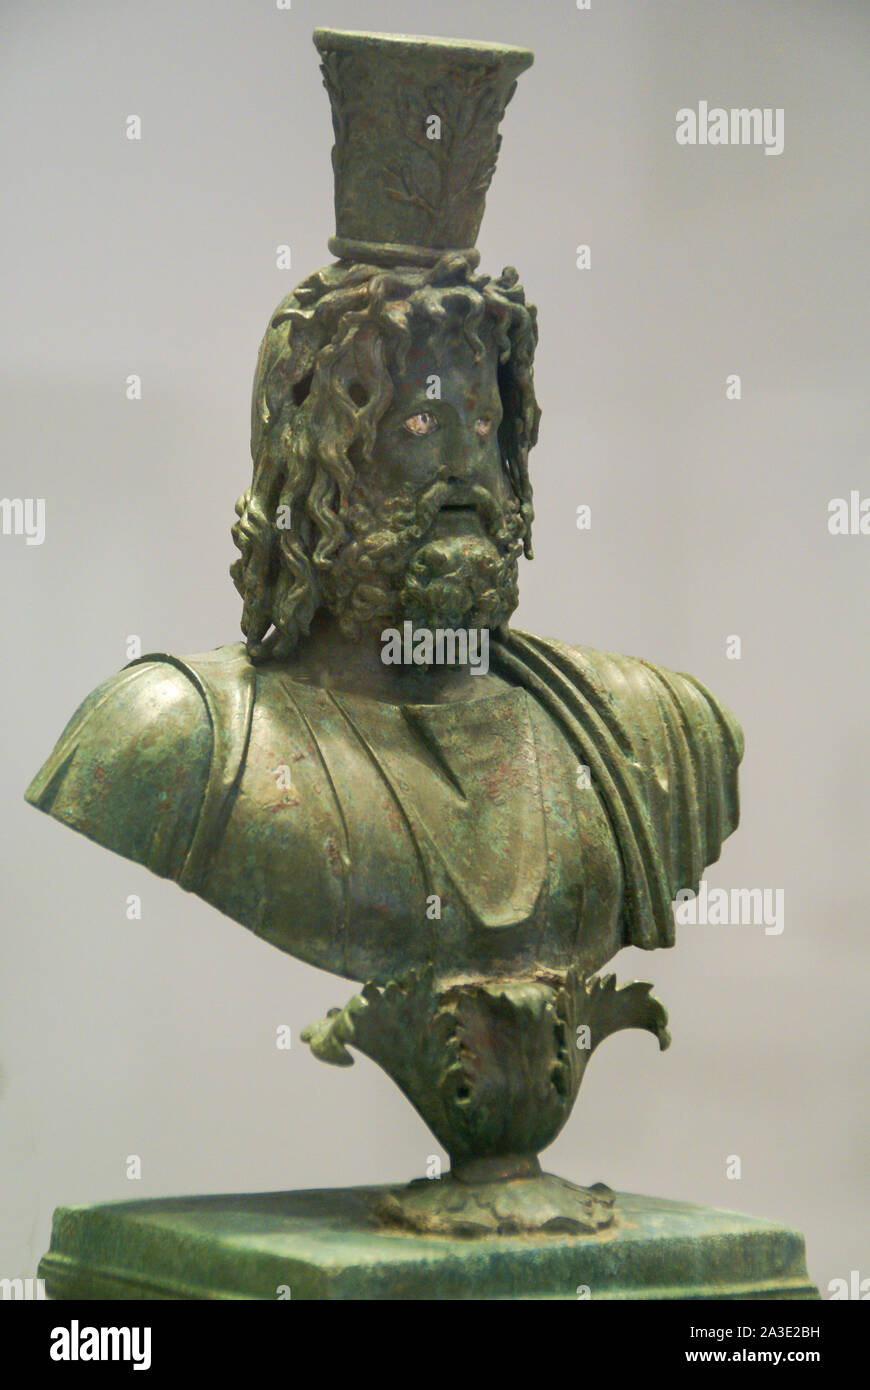 Greece. Bronze, metalwork. Bust of Serapis wearing a headdress known as a modius. National Archaeological Museum; Athens, Greece. Stock Photo